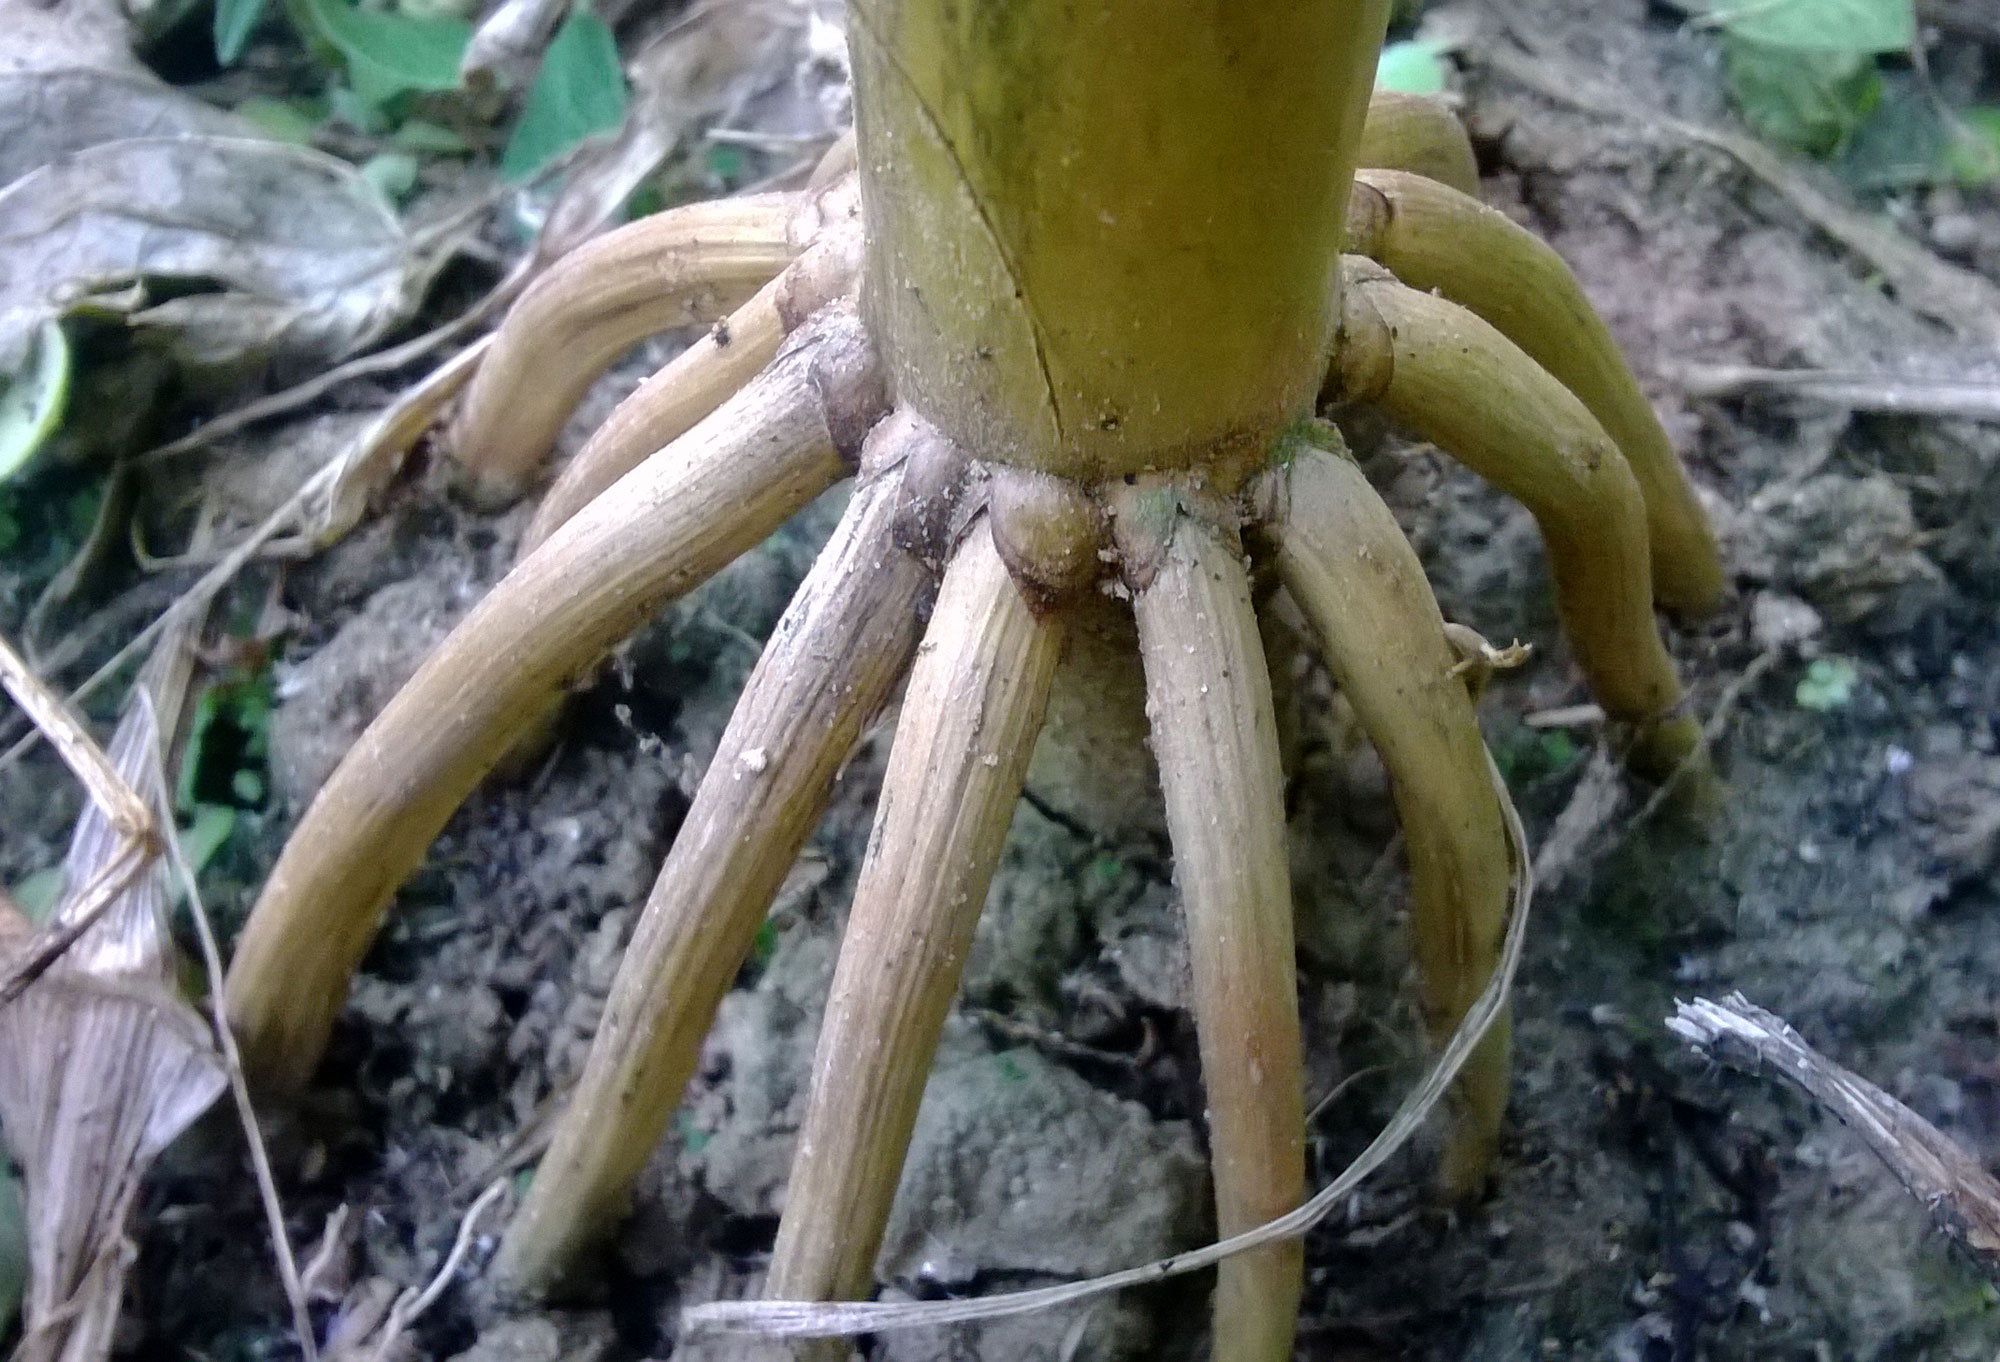 Photograph of prop roots of a maize plant. The photo shows the base of a corn stalk with multiple roots growing from a node aboveground and arching into the soil.